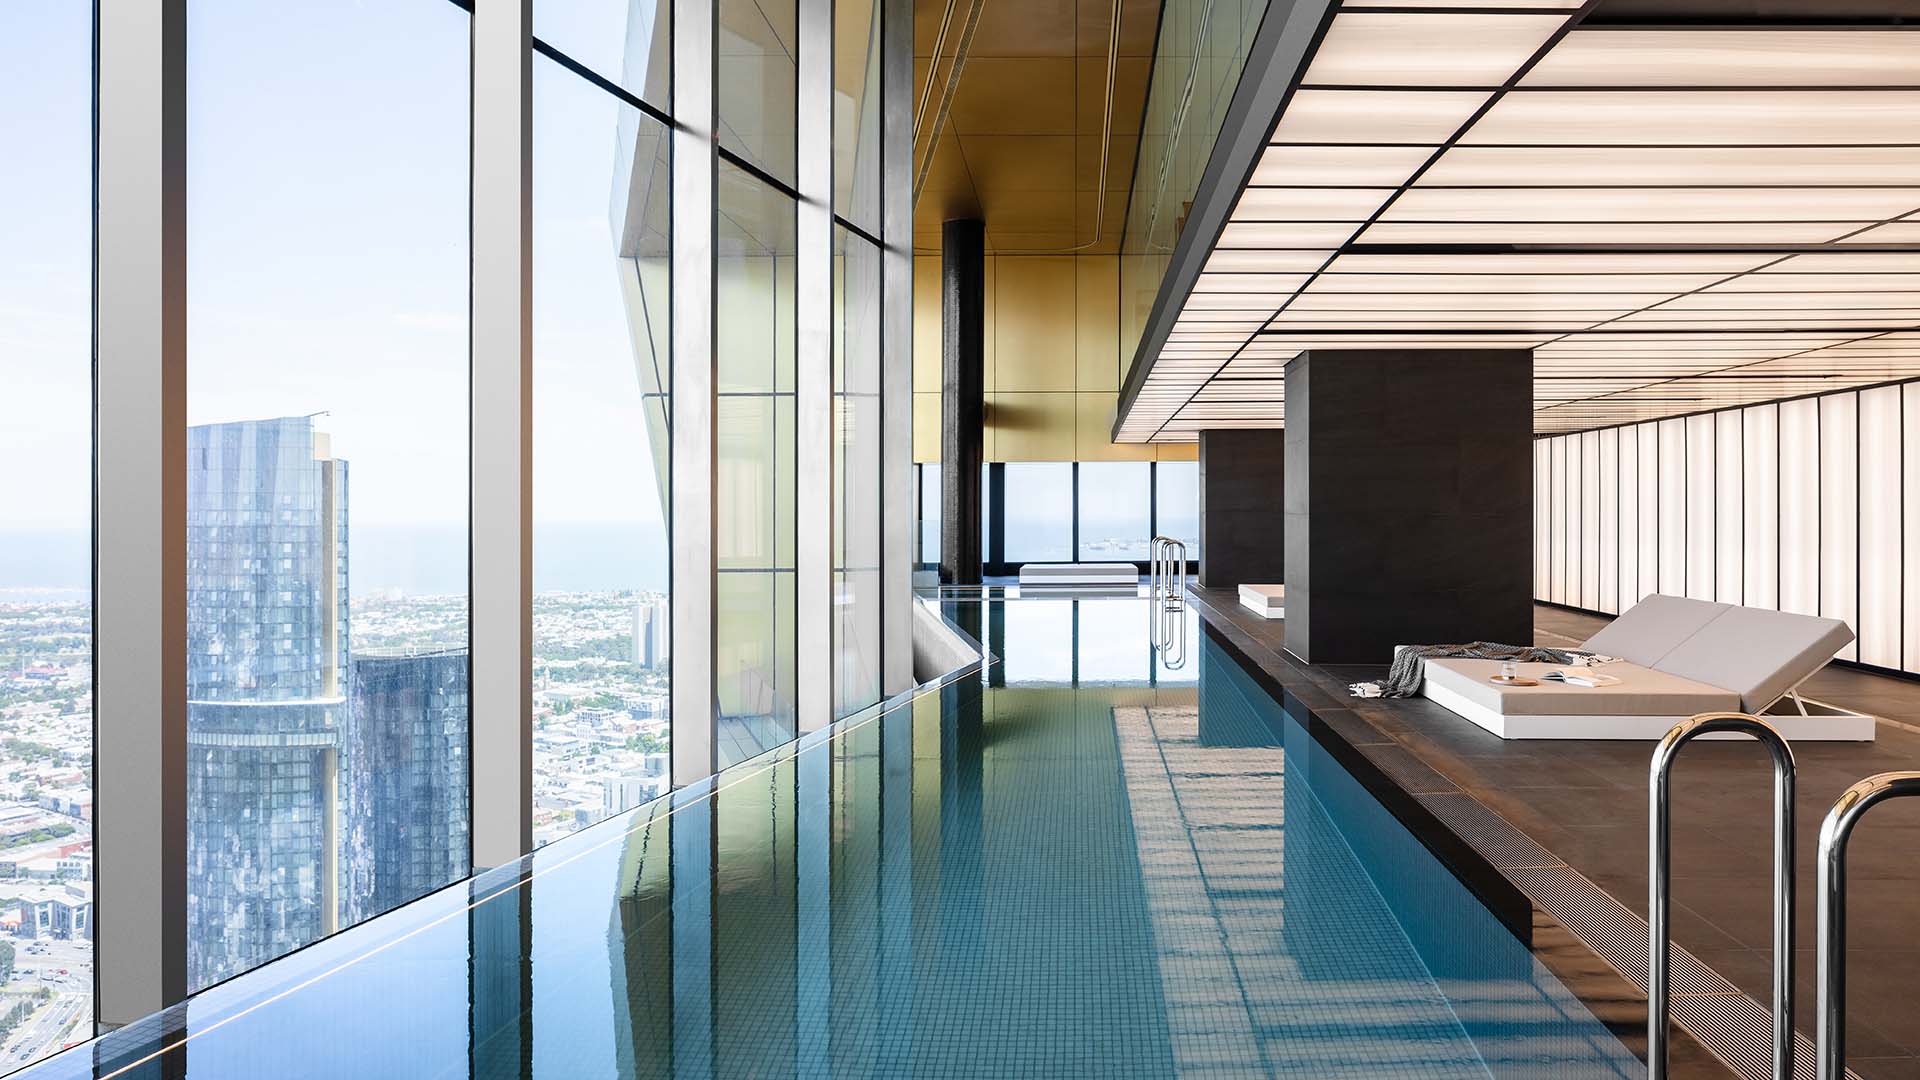 Melbourne's Australia 108 Tower Is Now Home to Two Infinity Pools 212 Metres Above the Ground